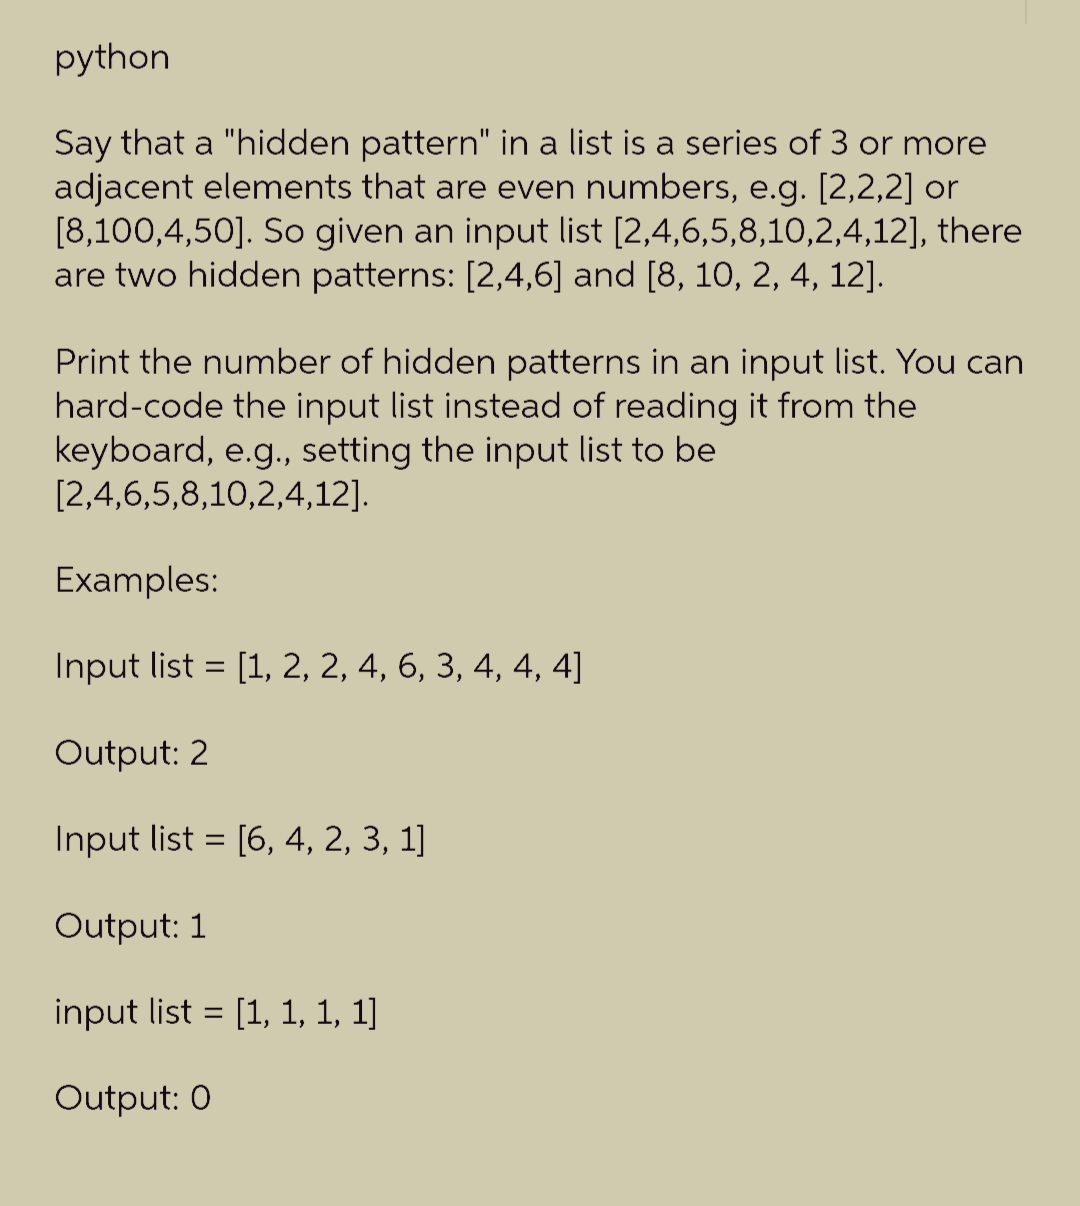 python
Say that a "hidden pattern" in a list is a series of 3 or more
adjacent elements that are even numbers, e.g. [2,2,2] or
[8,100,4,50]. So given an input list [2,4,6,5,8,10,2,4,12], there
are two hidden patterns: [2,4,6] and [8, 10, 2, 4, 12].
Print the number of hidden patterns in an input list. You can
hard-code the input list instead of reading it from the
keyboard, e.g., setting the input list to be
[2,4,6,5,8,10,2,4,12].
Examples:
Input list = [1, 2, 2, 4, 6, 3, 4, 4, 4]
Output: 2
Input list = [6, 4, 2, 3, 1]
Output: 1
input list = [1, 1, 1, 1]
Output: 0
